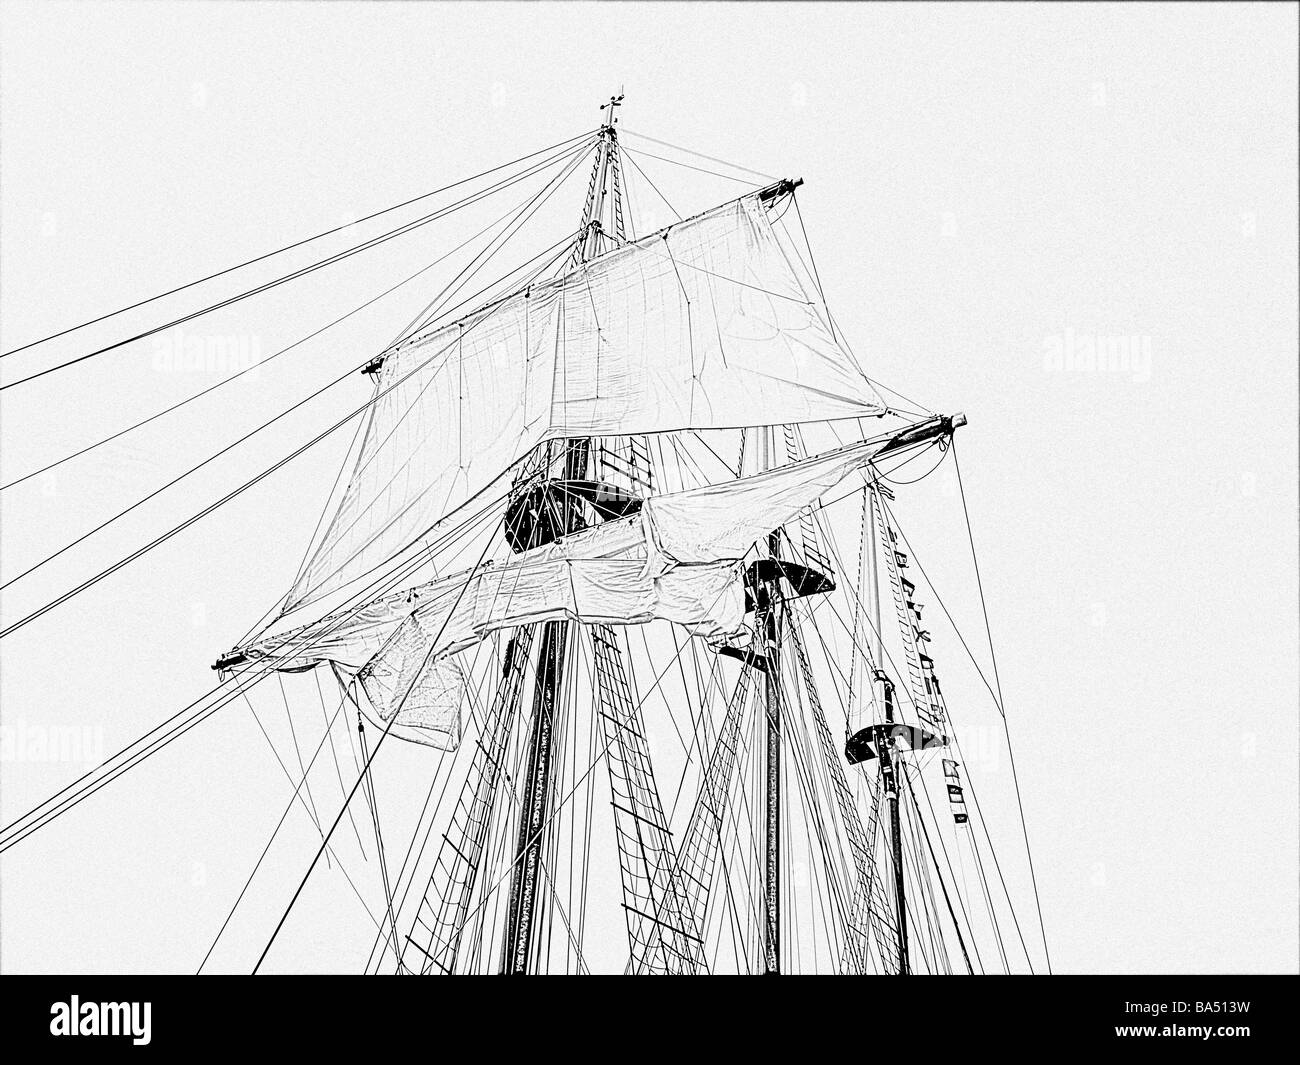 tallship tallships three masts with unfurled top sail on mast with ropes  ladders no deck drawing outline in black and white Stock Photo  Alamy